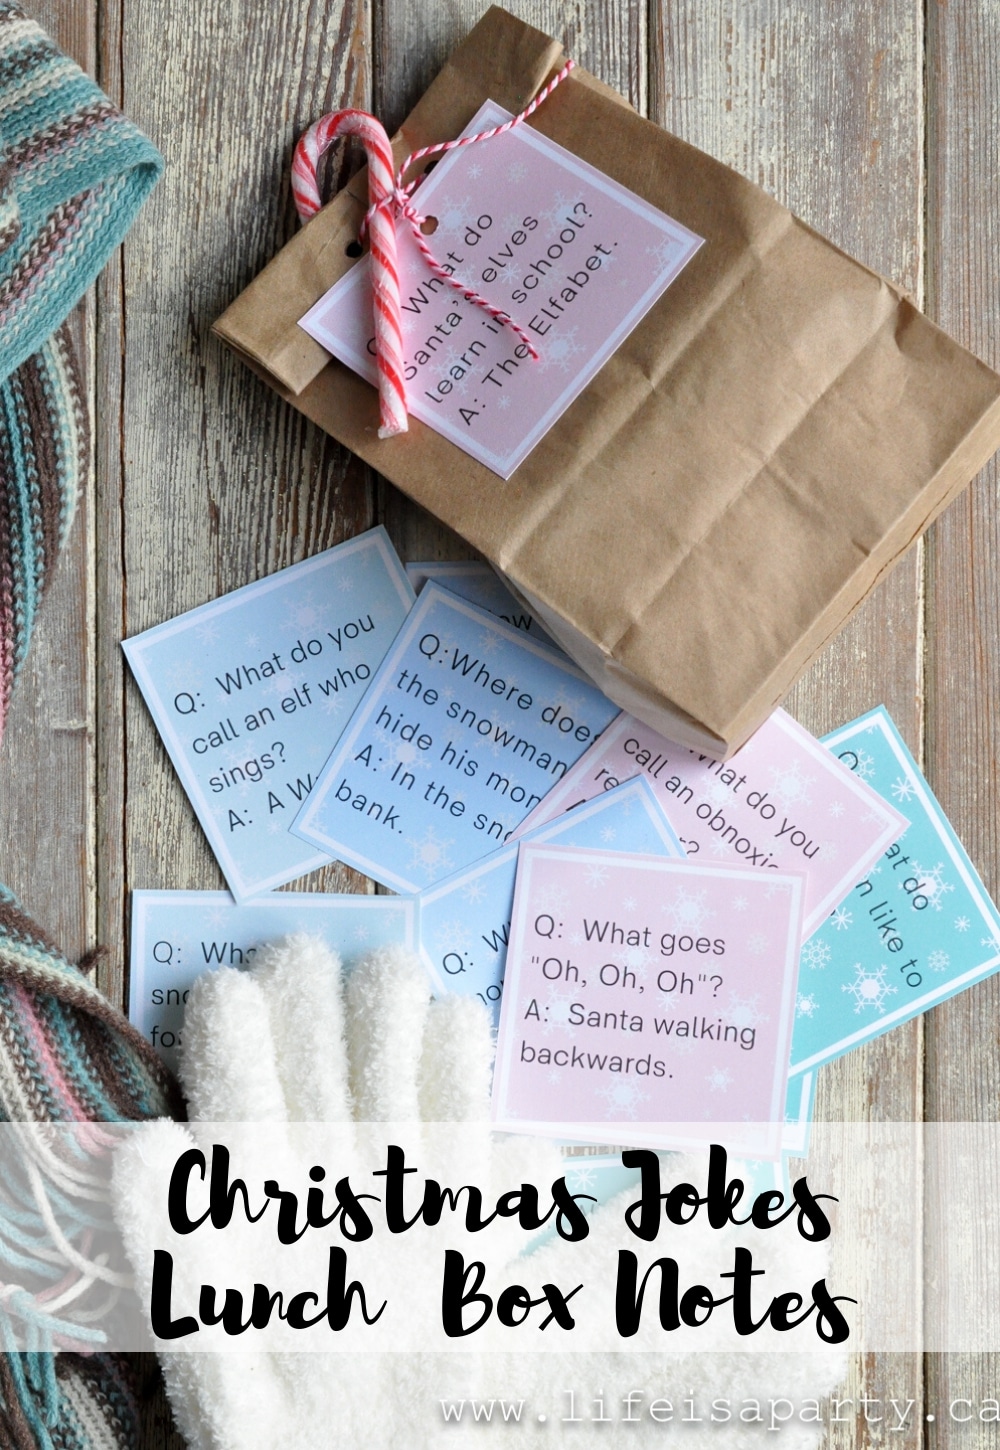 Christmas Jokes Lunchbox Notes: add a smile and a note to your child's lunch with these printable lunchbox notes for Christmas.